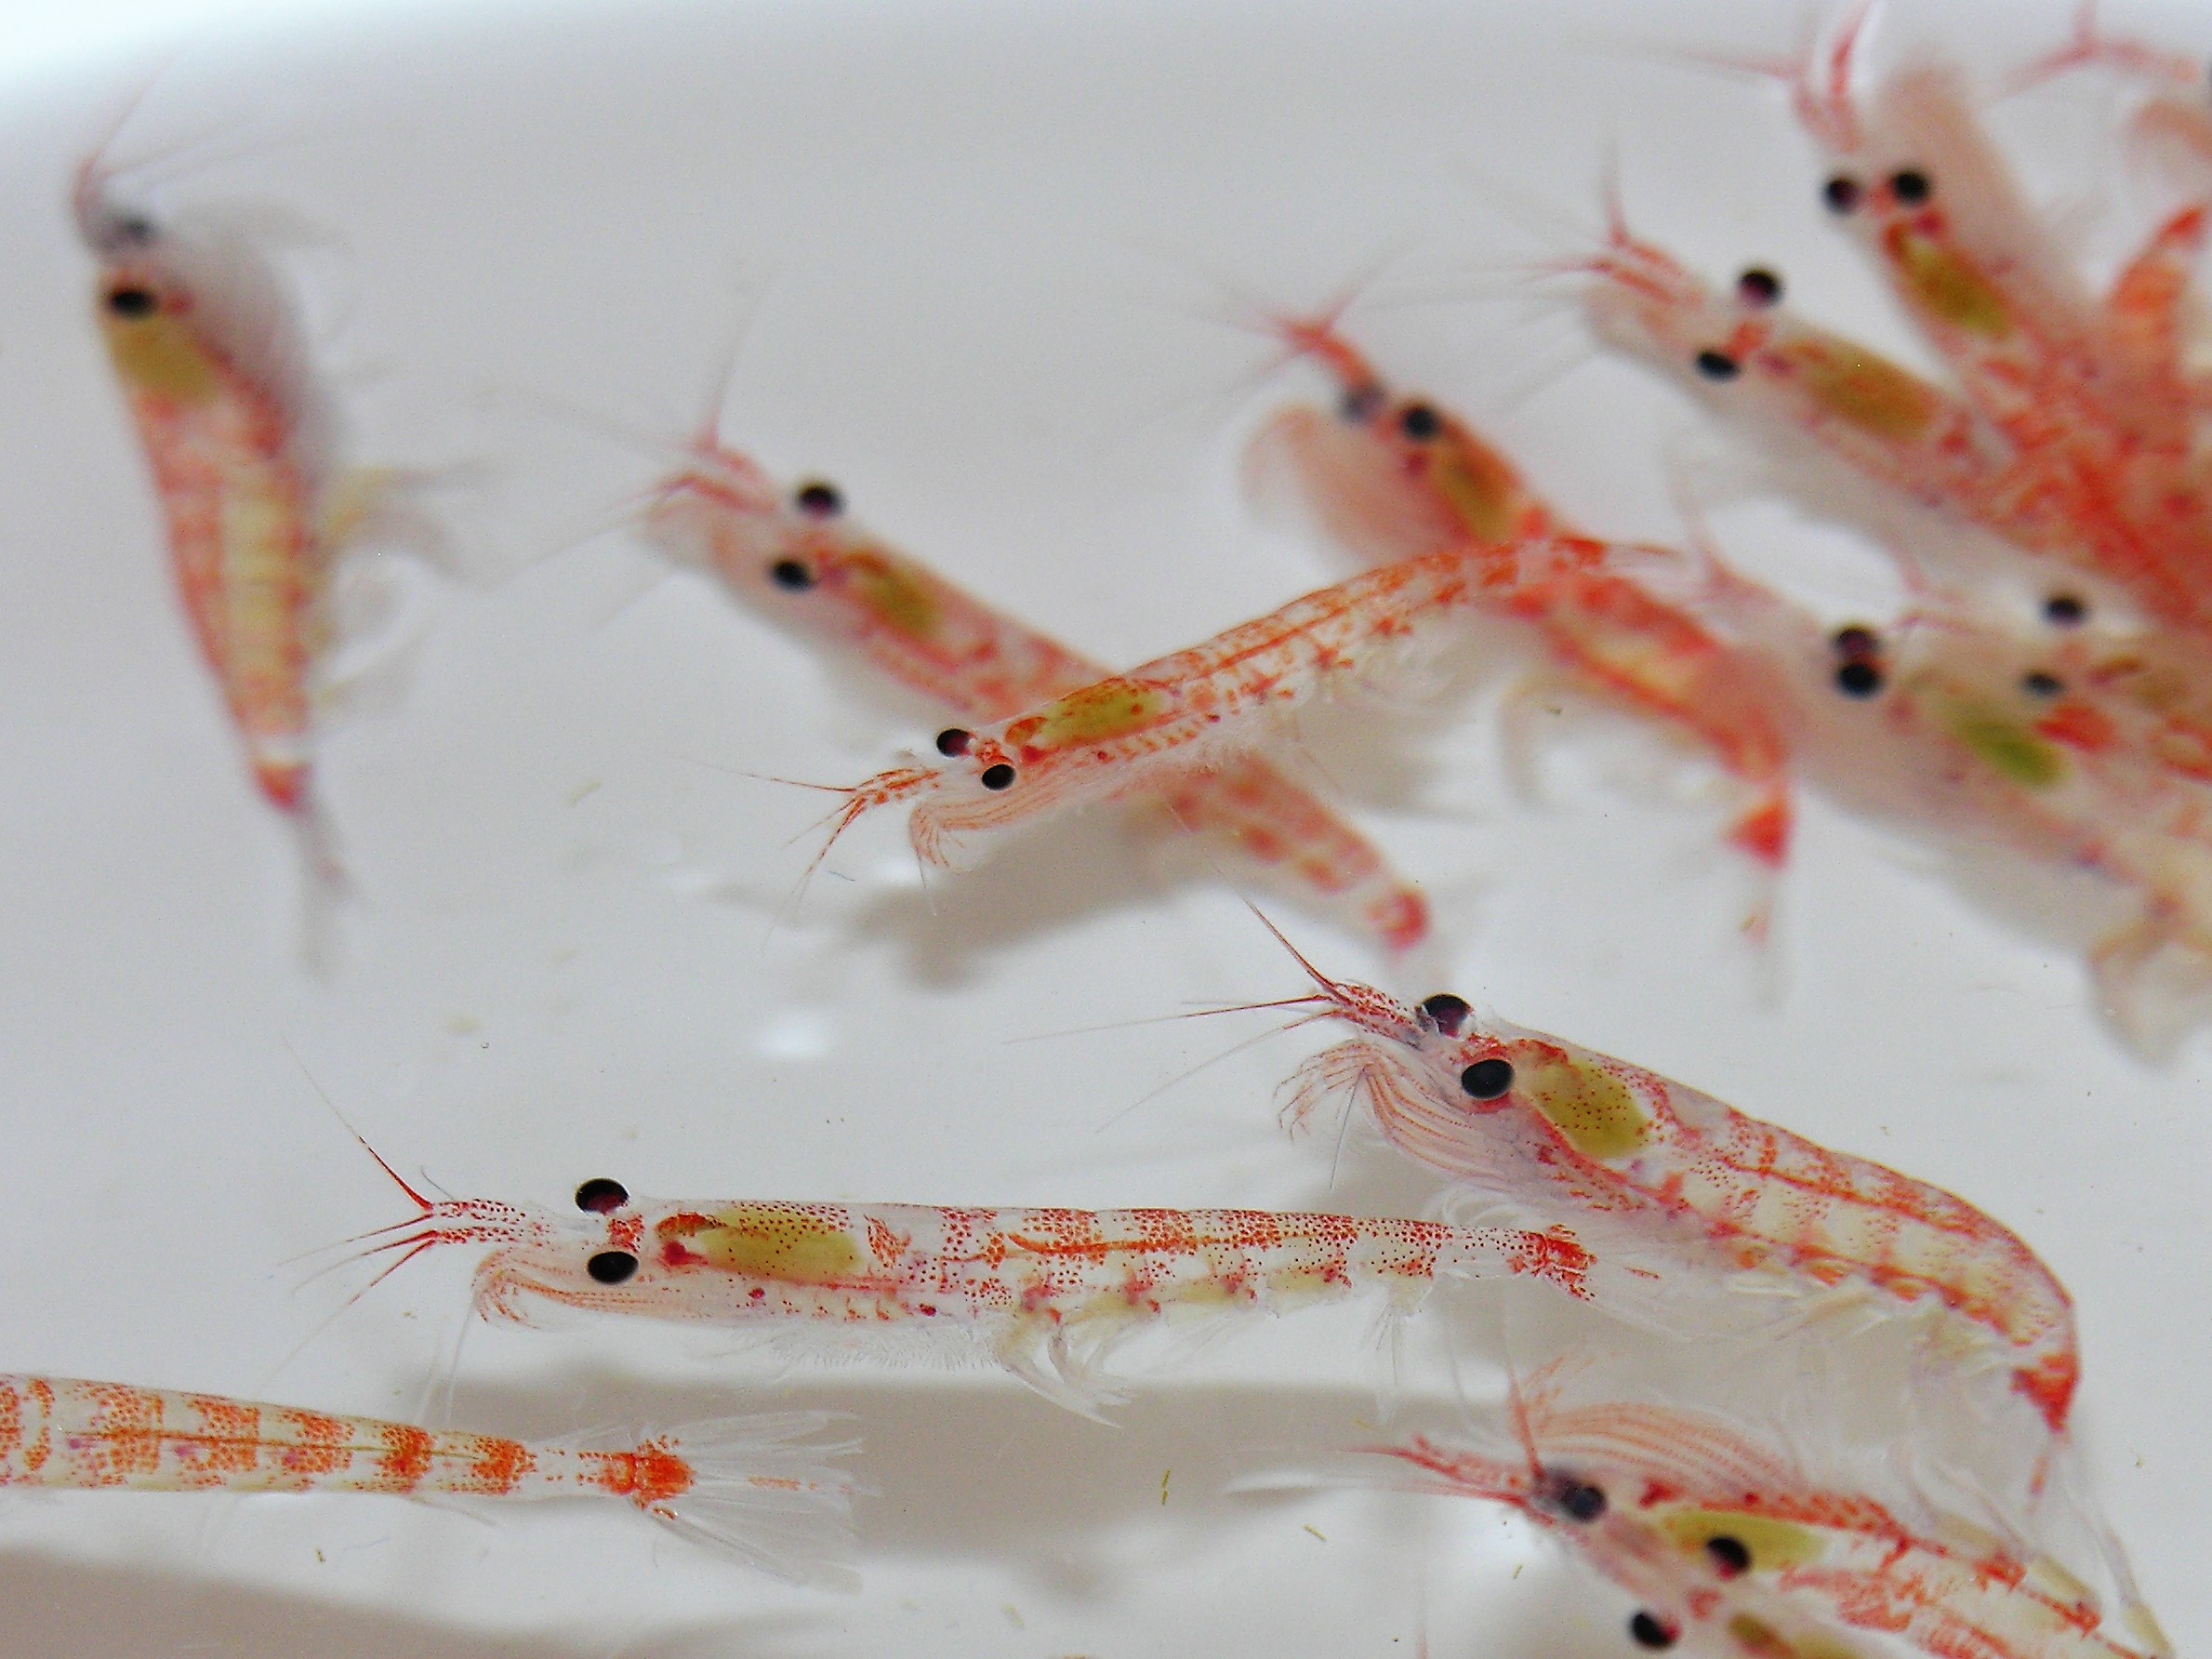 Steve Nicol/Antarctic krill in a laboratory container